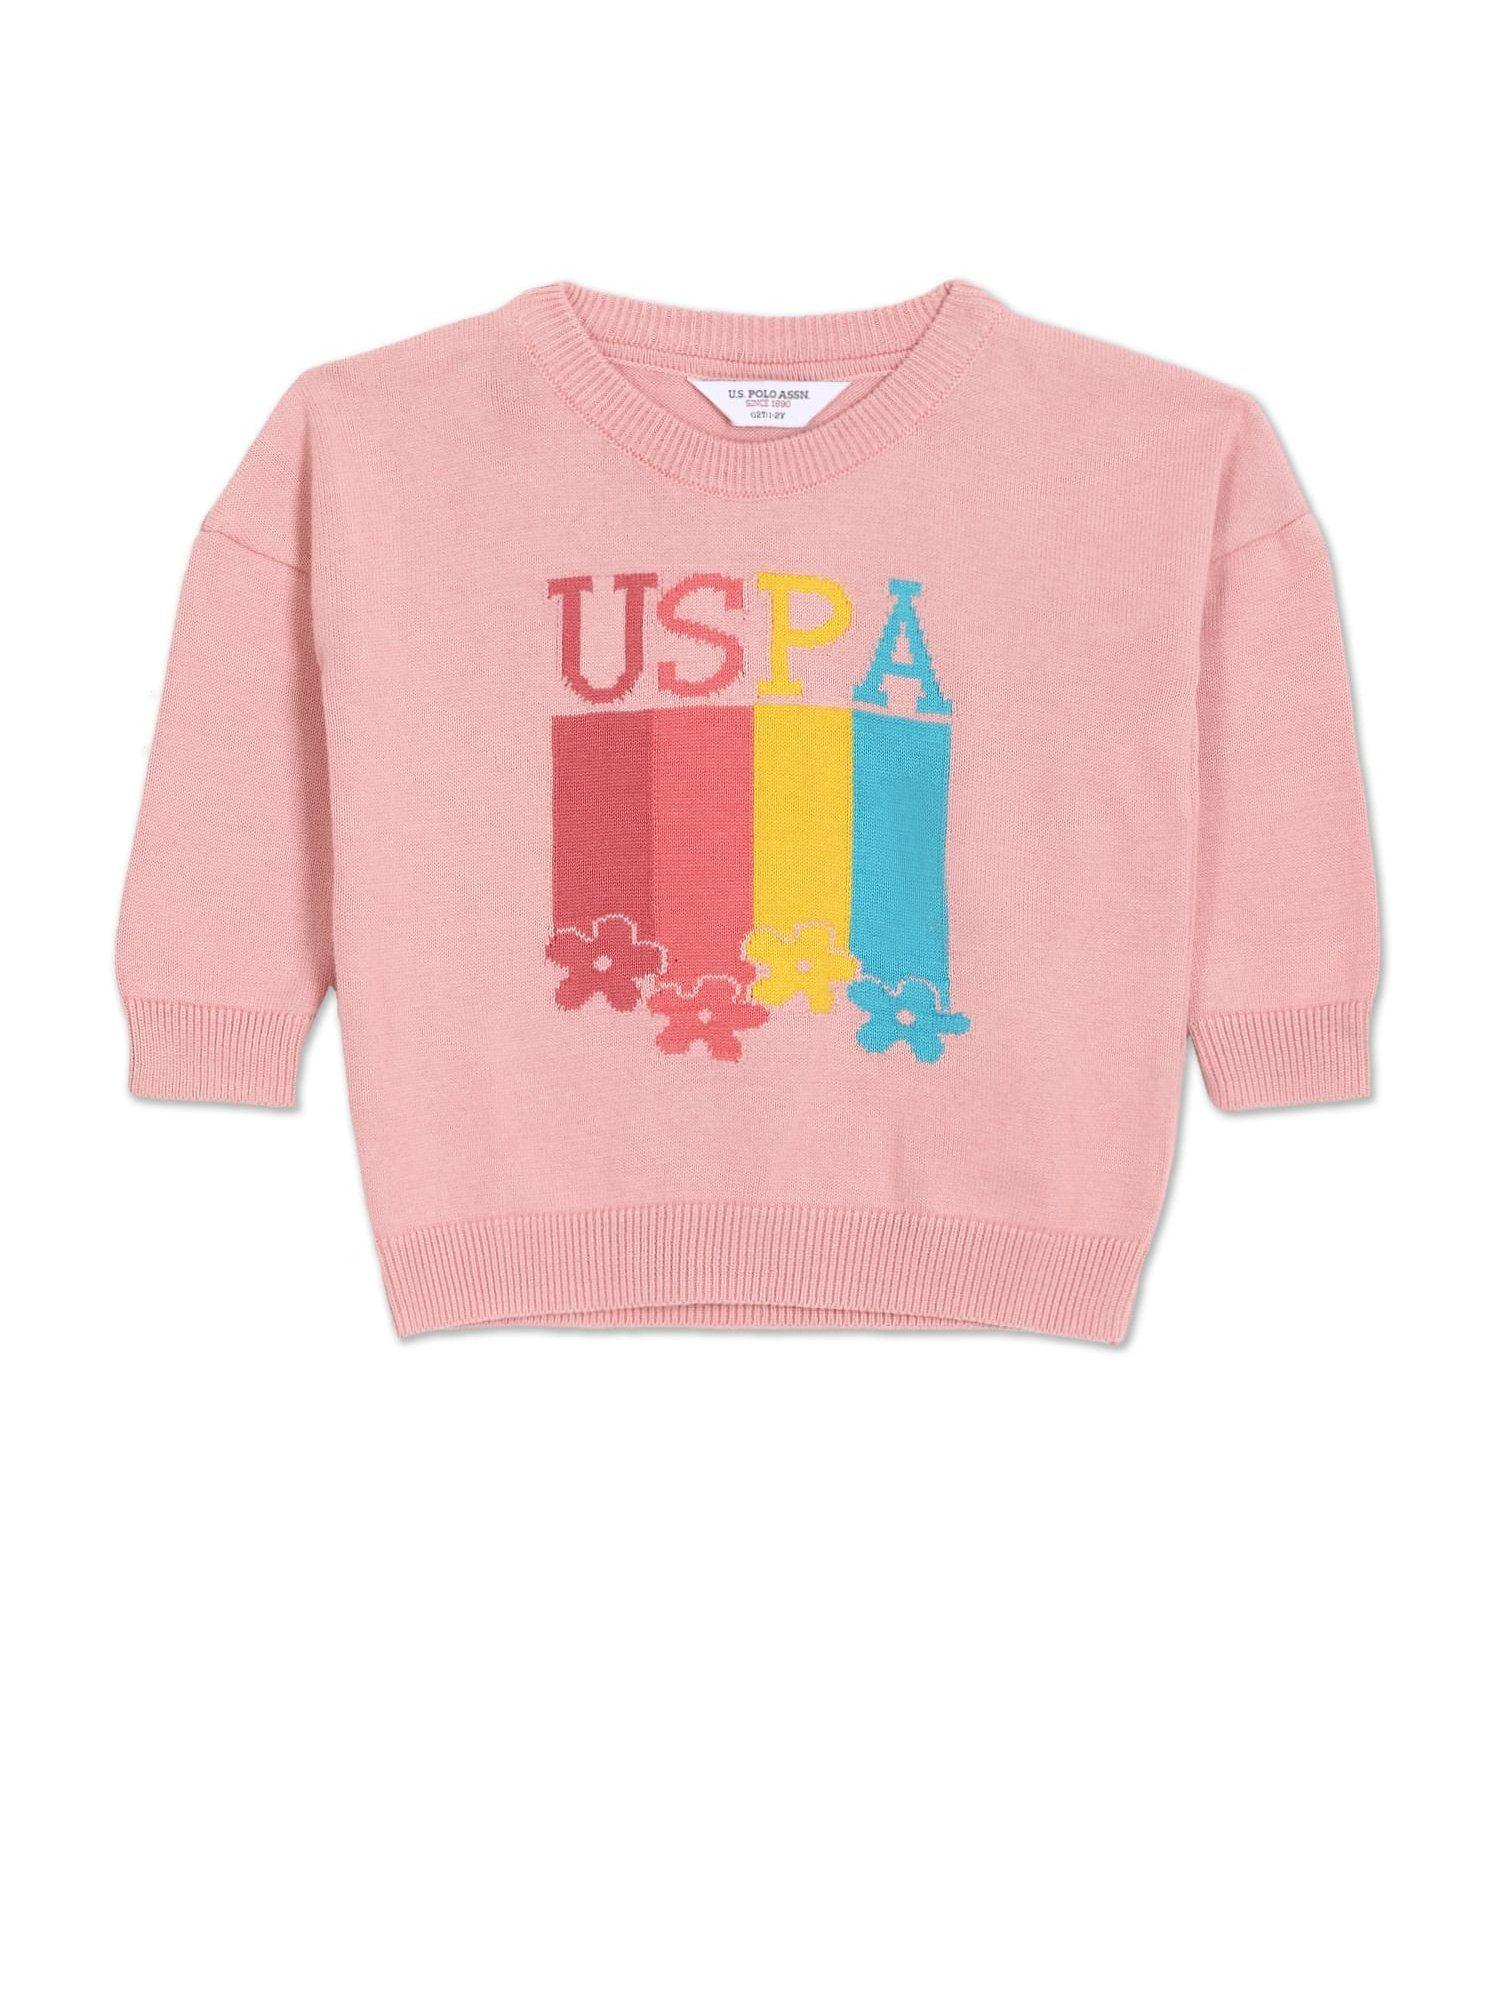 girls dusty pink crew neck patterned knit cotton sweater